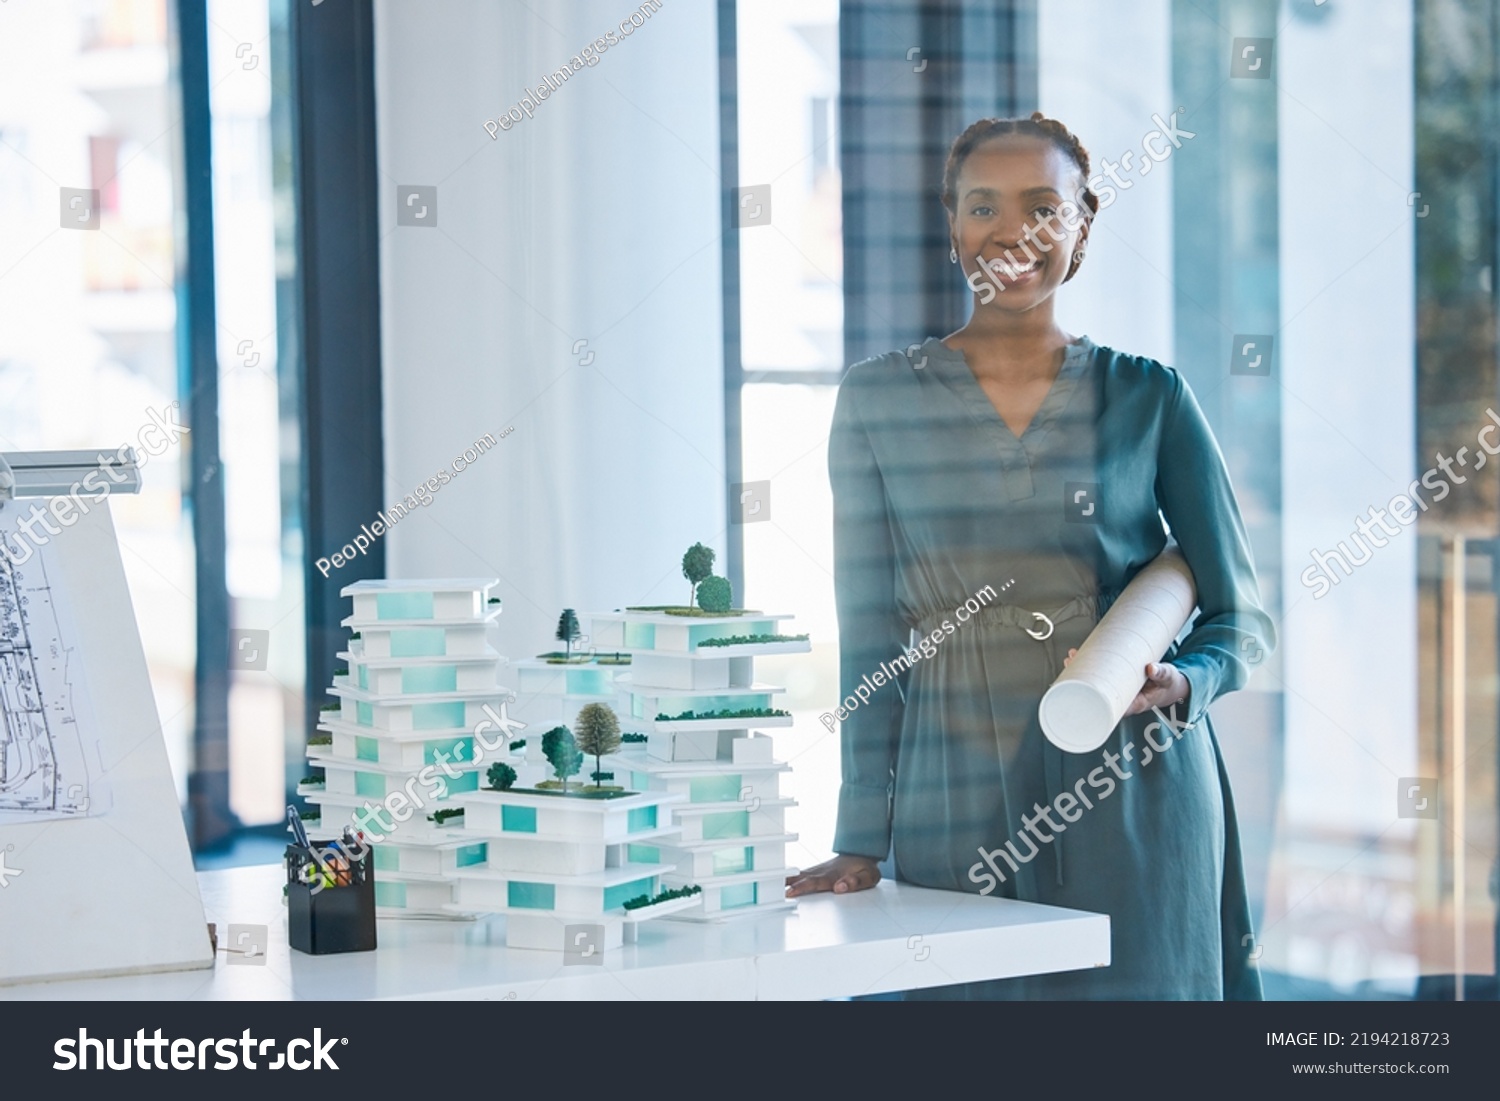 Architect, engineer and designer holding a blueprint with a positive mindset, mission and vision in an office. Portrait of a black woman standing next to 3D representation of proposed building #2194218723